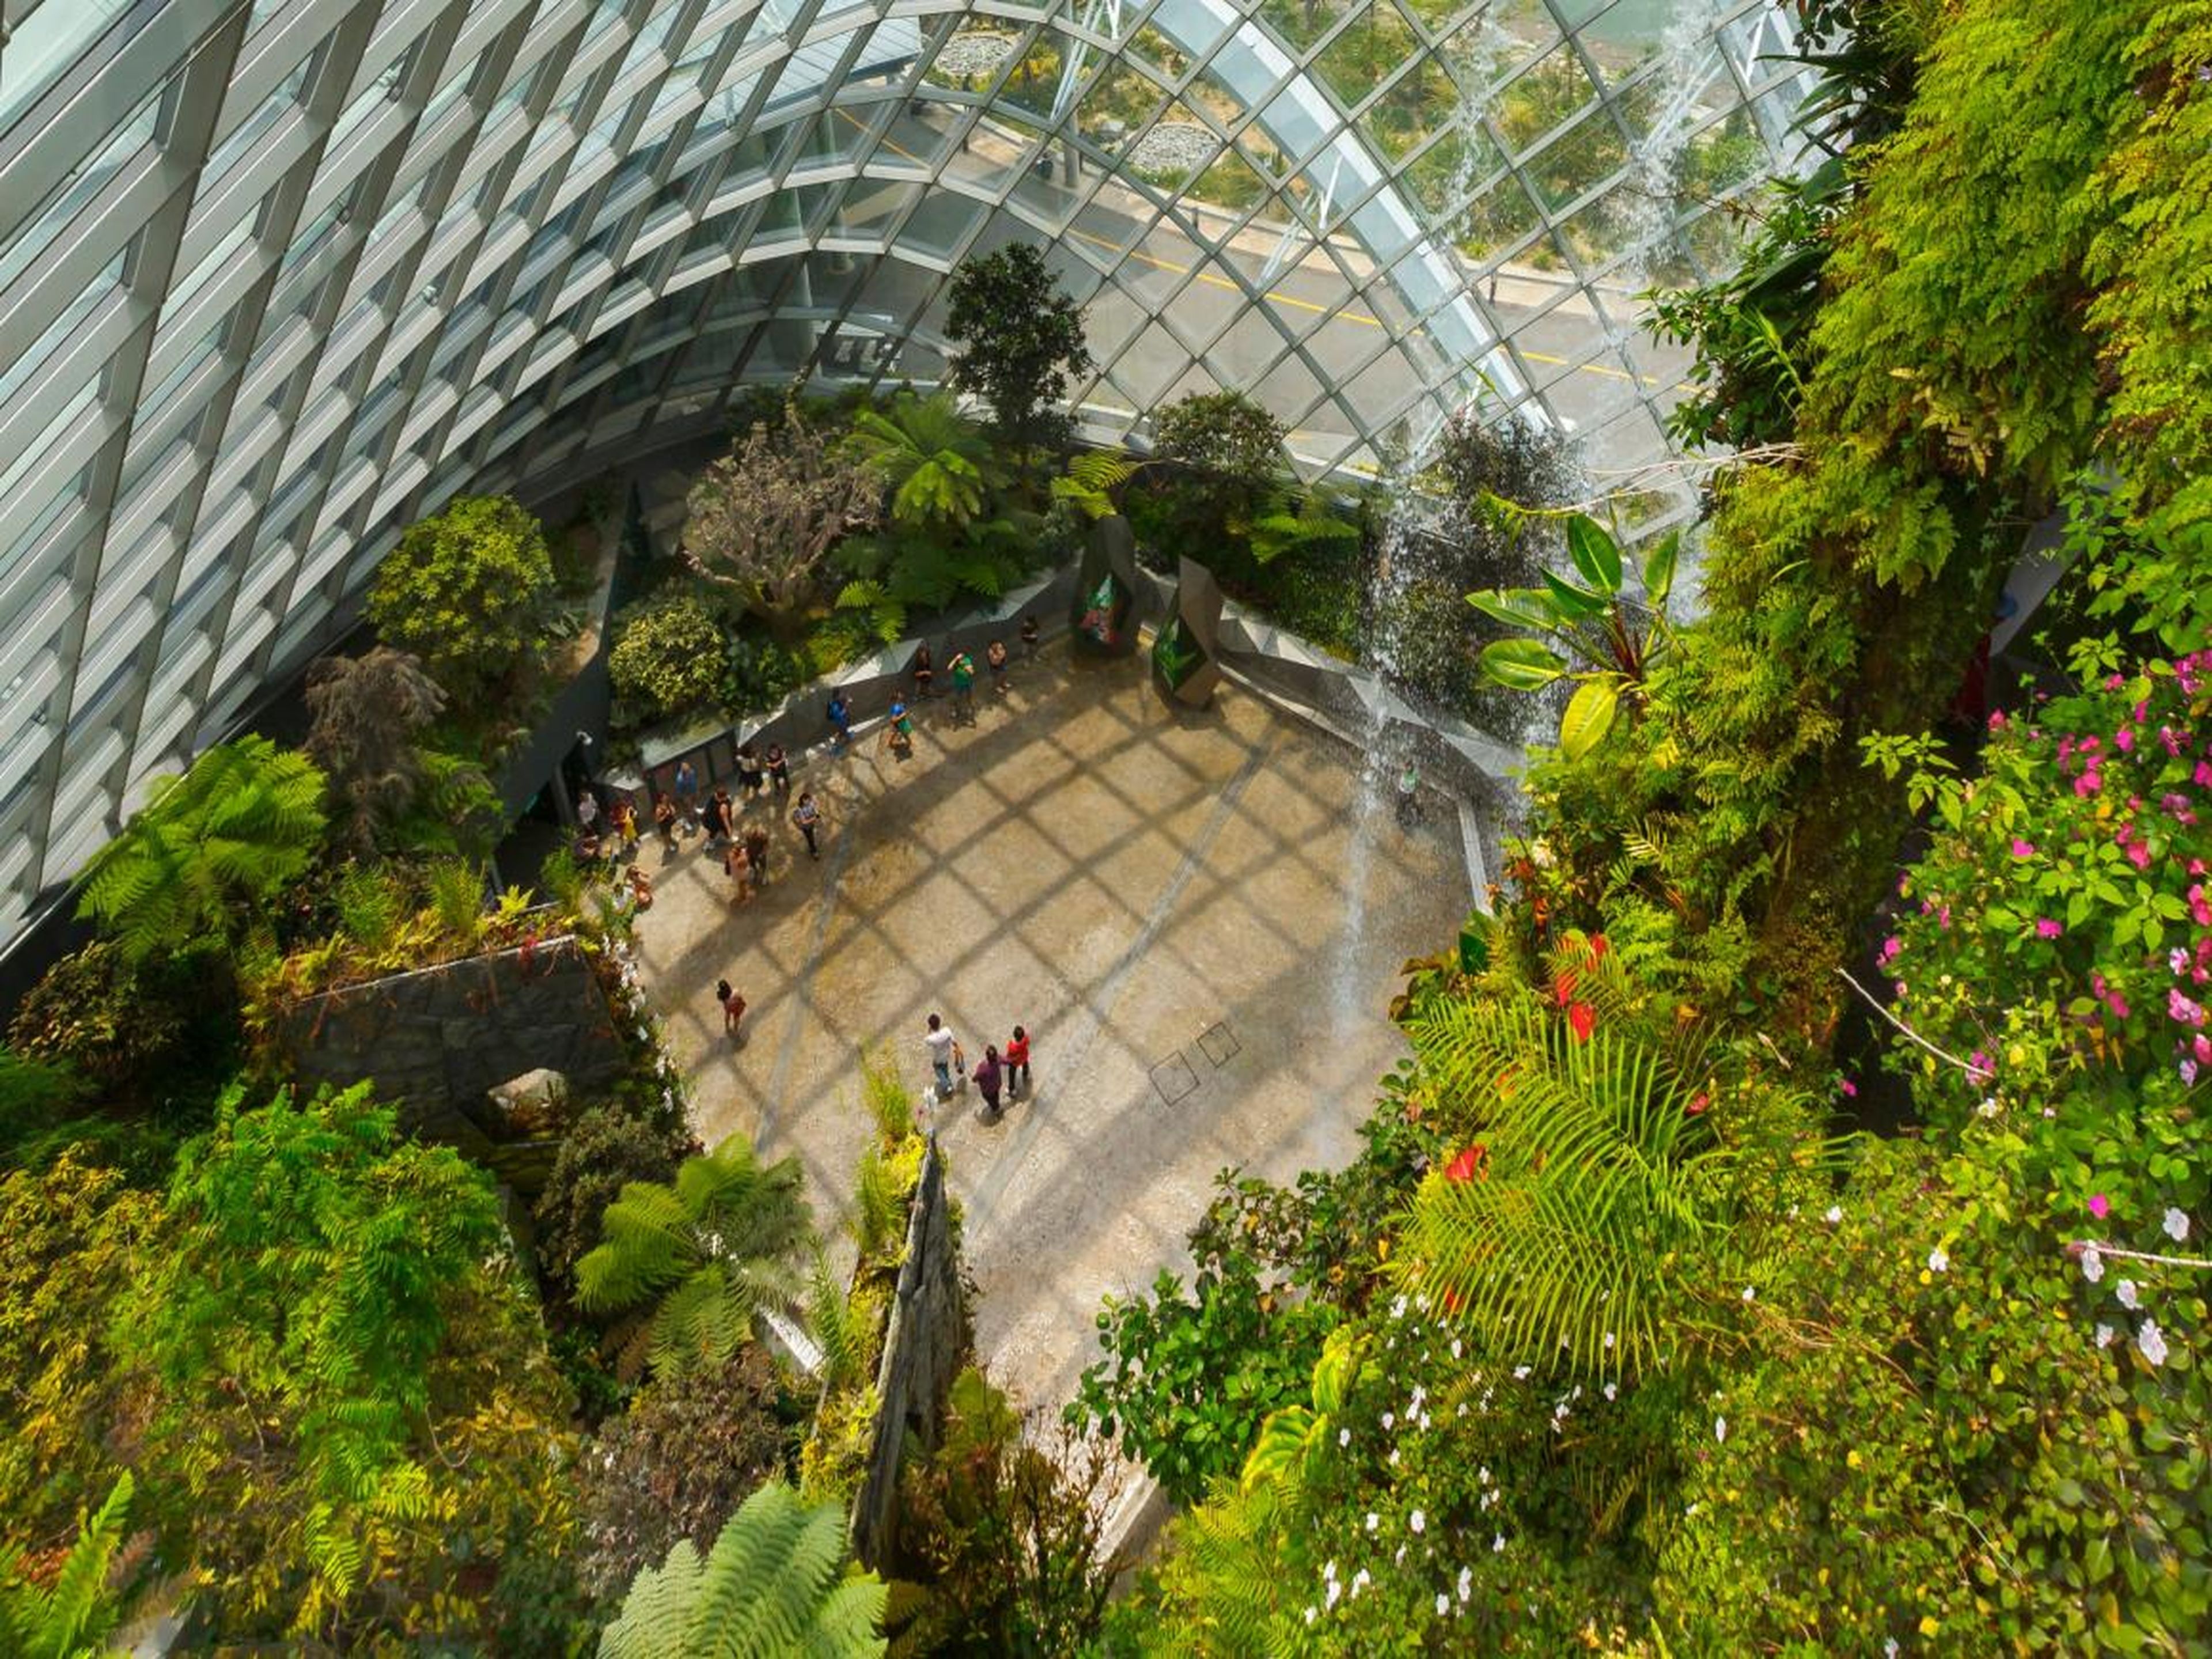 This place is not for working, though. Cloud Forest and another exhibit called Flower Dome are twin exhibits that teach patrons about the diversity of plant life outside of Singapore.